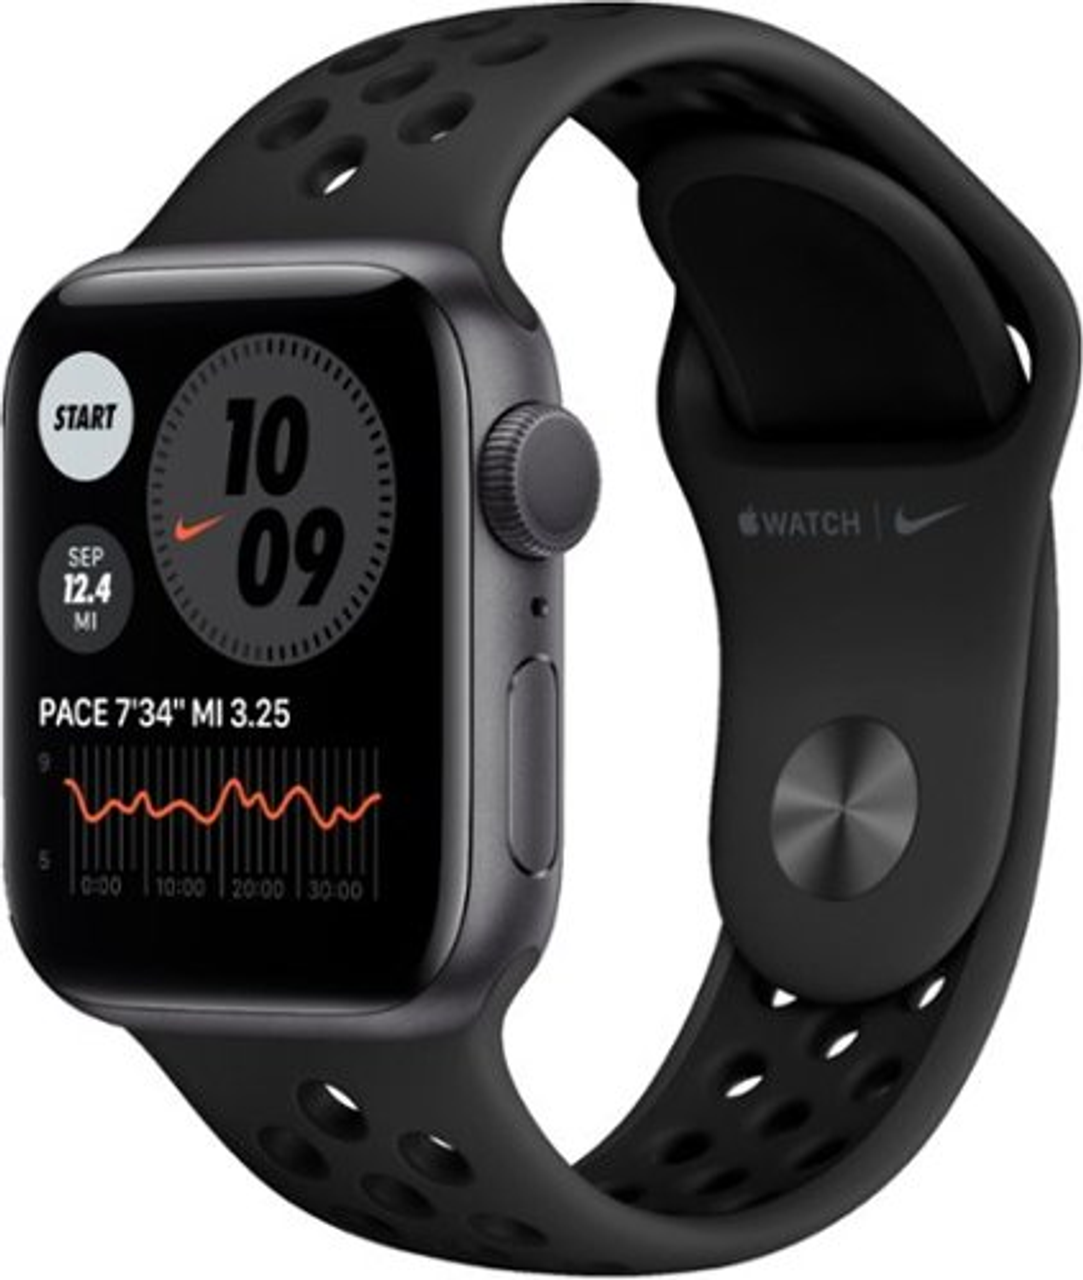 Refurbished Apple Watch Nike Series 6 (GPS) 40mm Space Gray Aluminum Case with Anthracite/Black Nike Sport Band - Space Gray